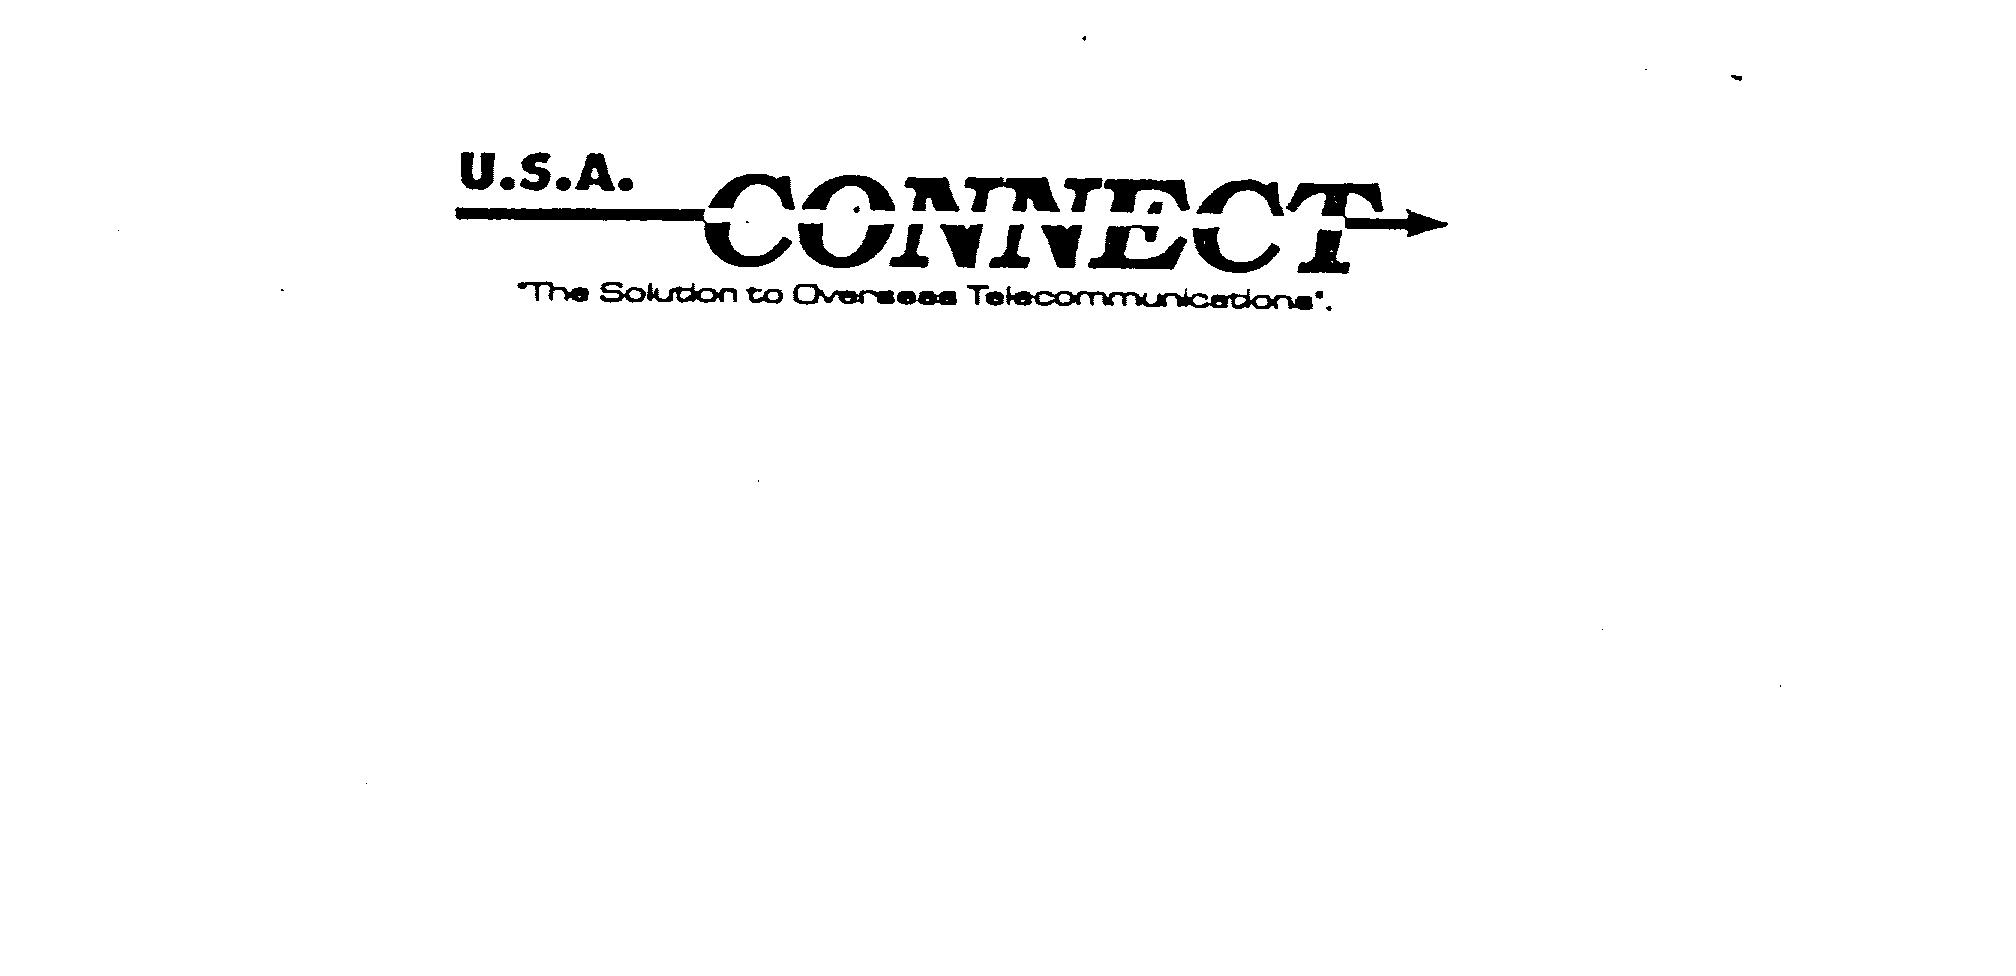  U.S.A. CONNECT "THE SOLUTION TO OVERSEAS TELE-COMMUNICATIONS."